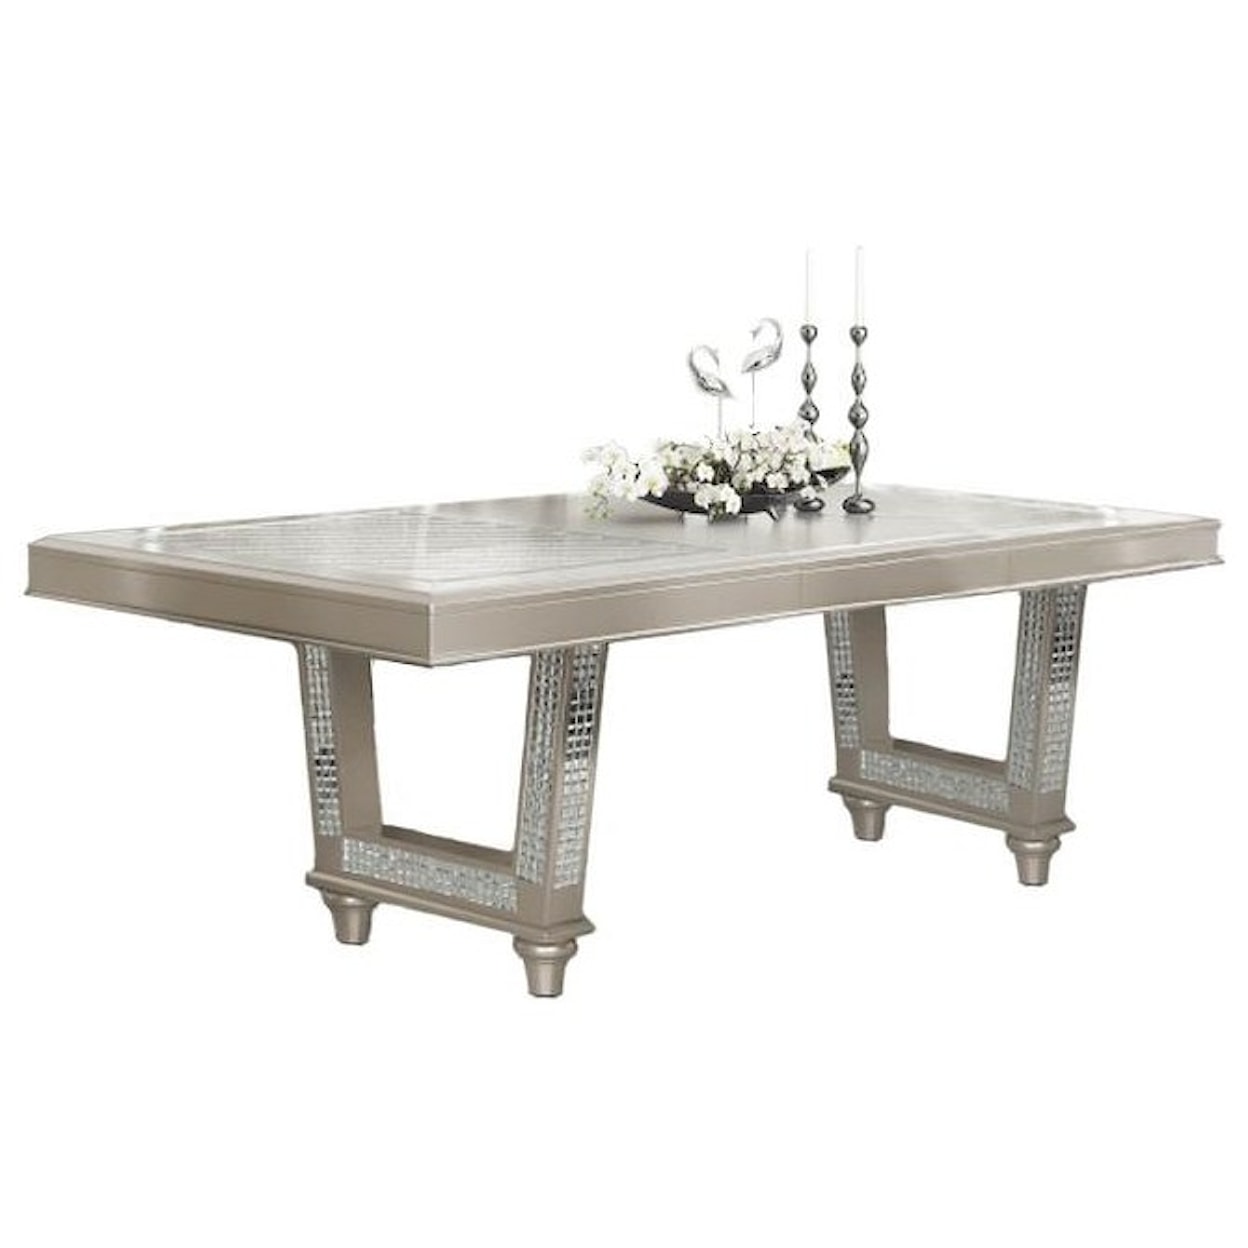 McFerran Home Furnishings D168 Dining Table